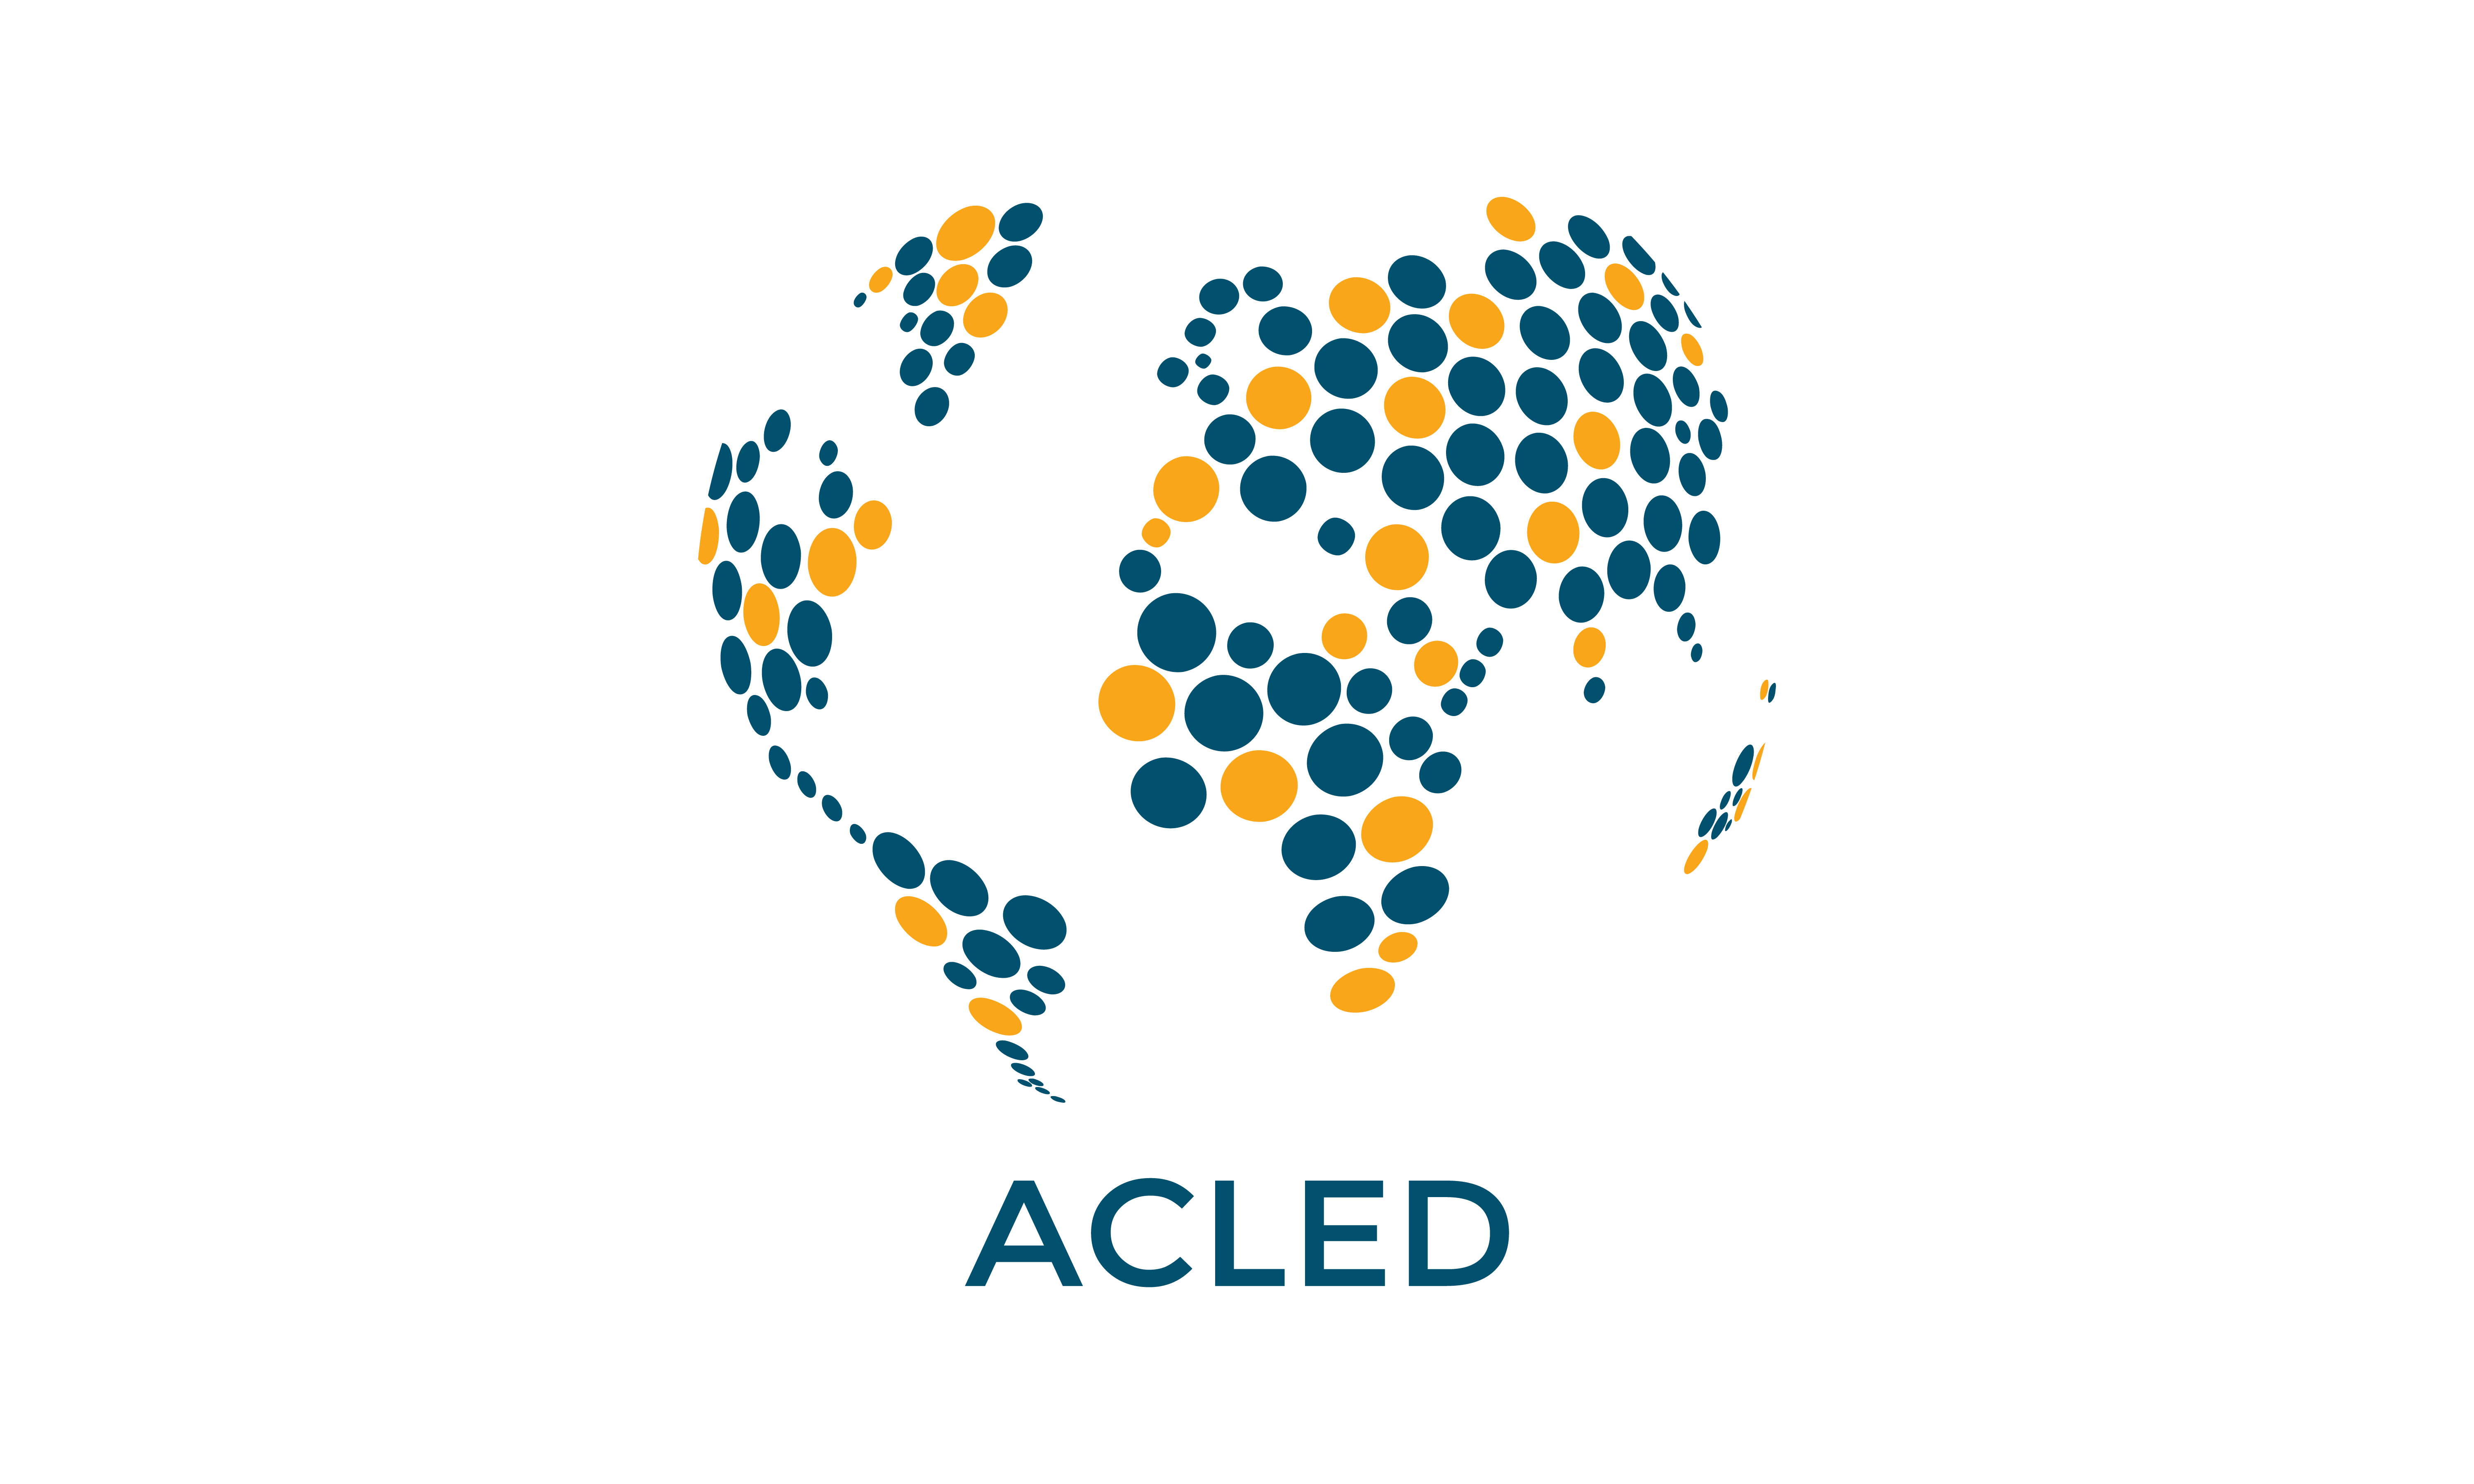 Armed Conflict Location & Event Data Project (ACLED)